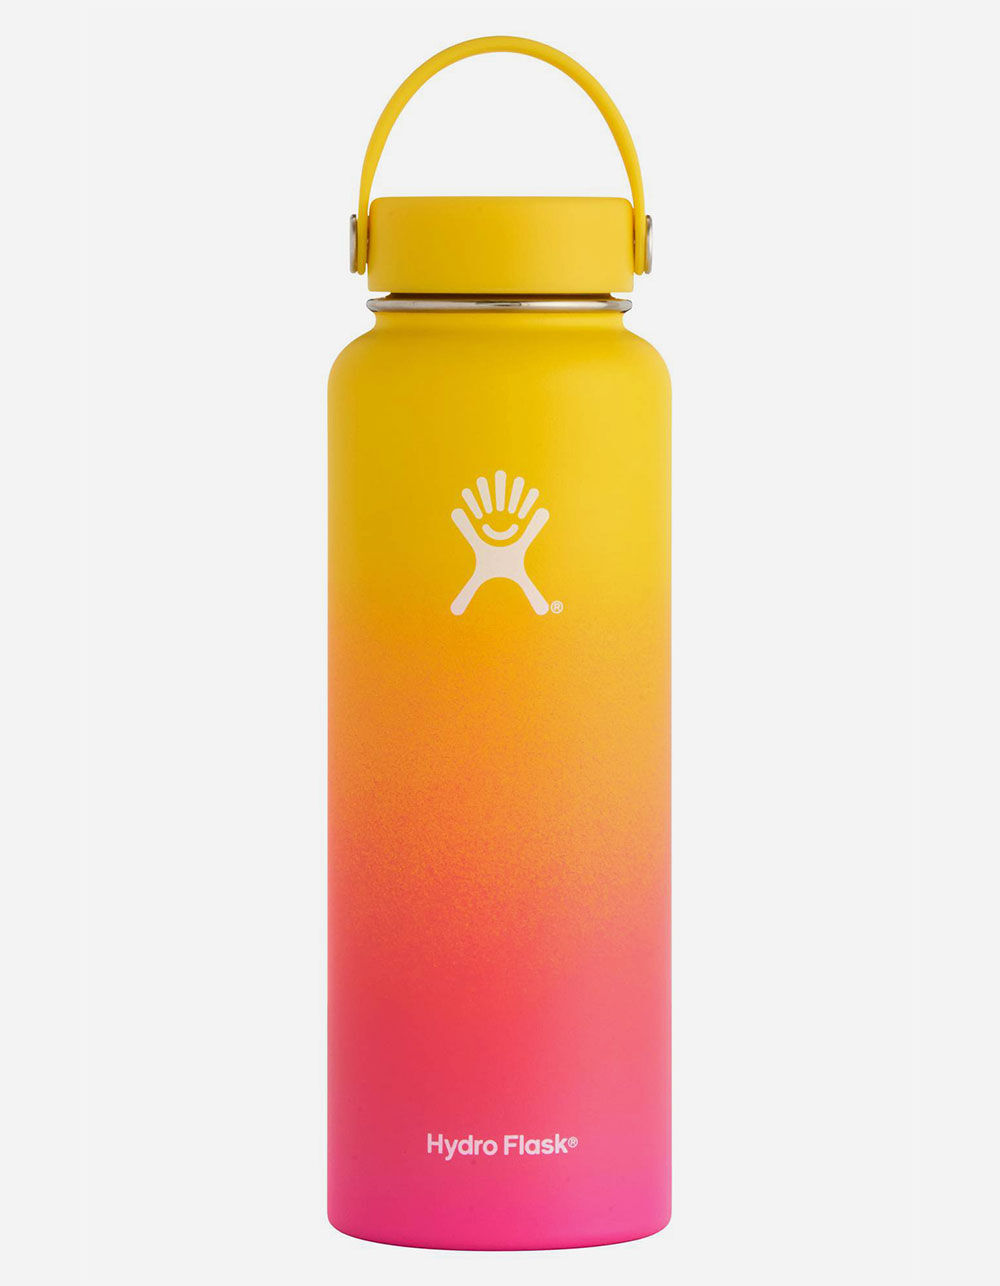 HYDRO　40oz　SUNSET　Bottle　Wide　FLASK　Water　Tillys　Sunset　Mouth